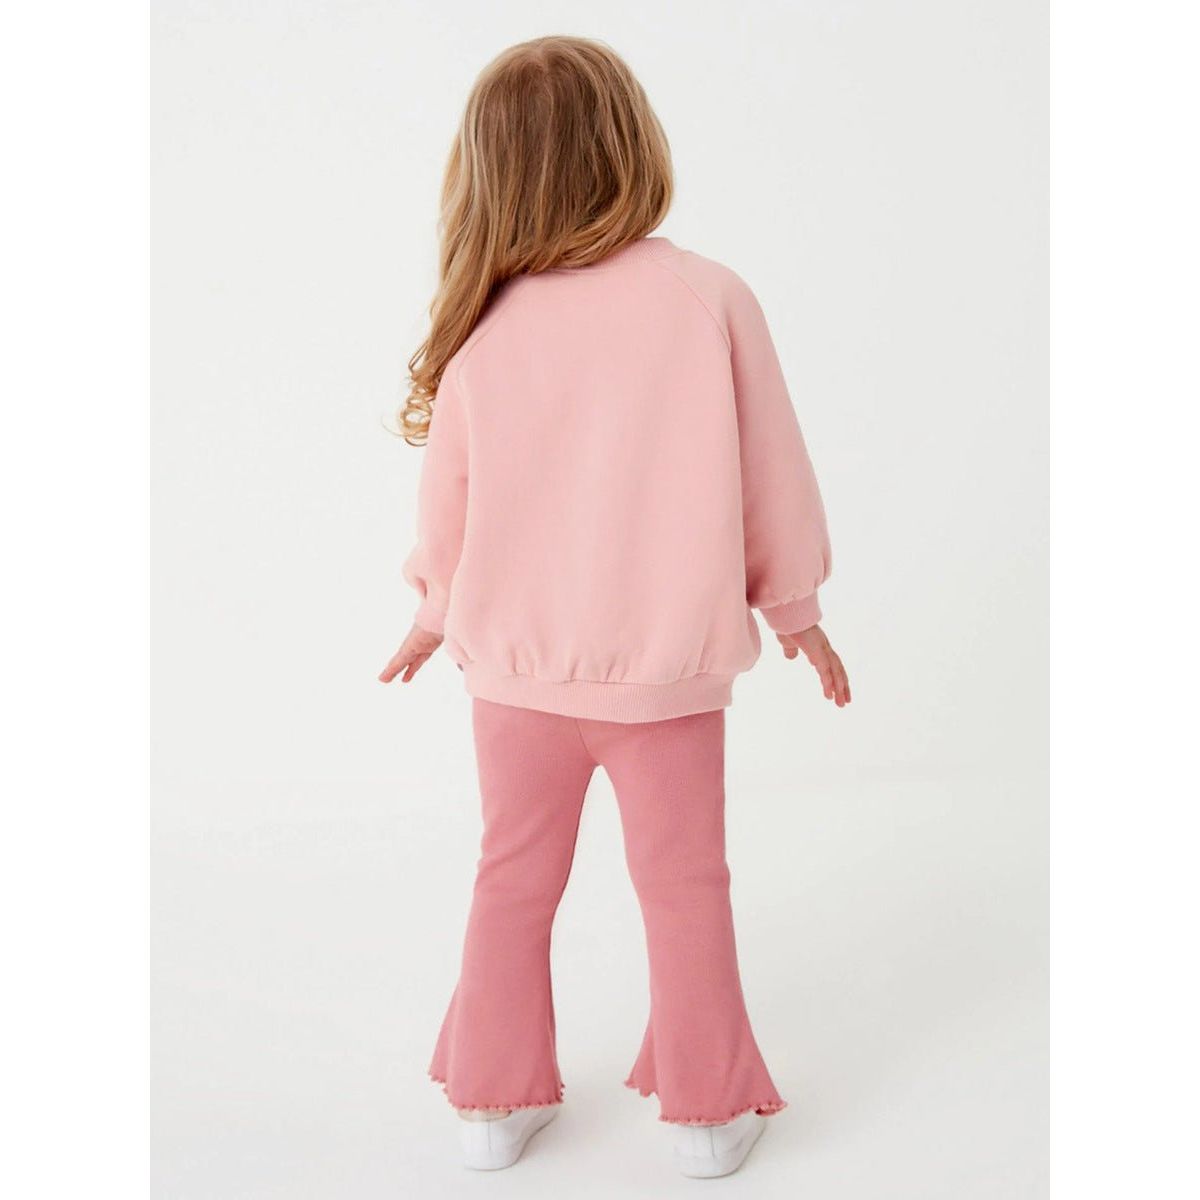 Spring Baby Kids Girls Letters Embroidery Long Sleeves Pullover and Solid Flared Pants Set | KME - Quality Children's Apparel - KME means the very best